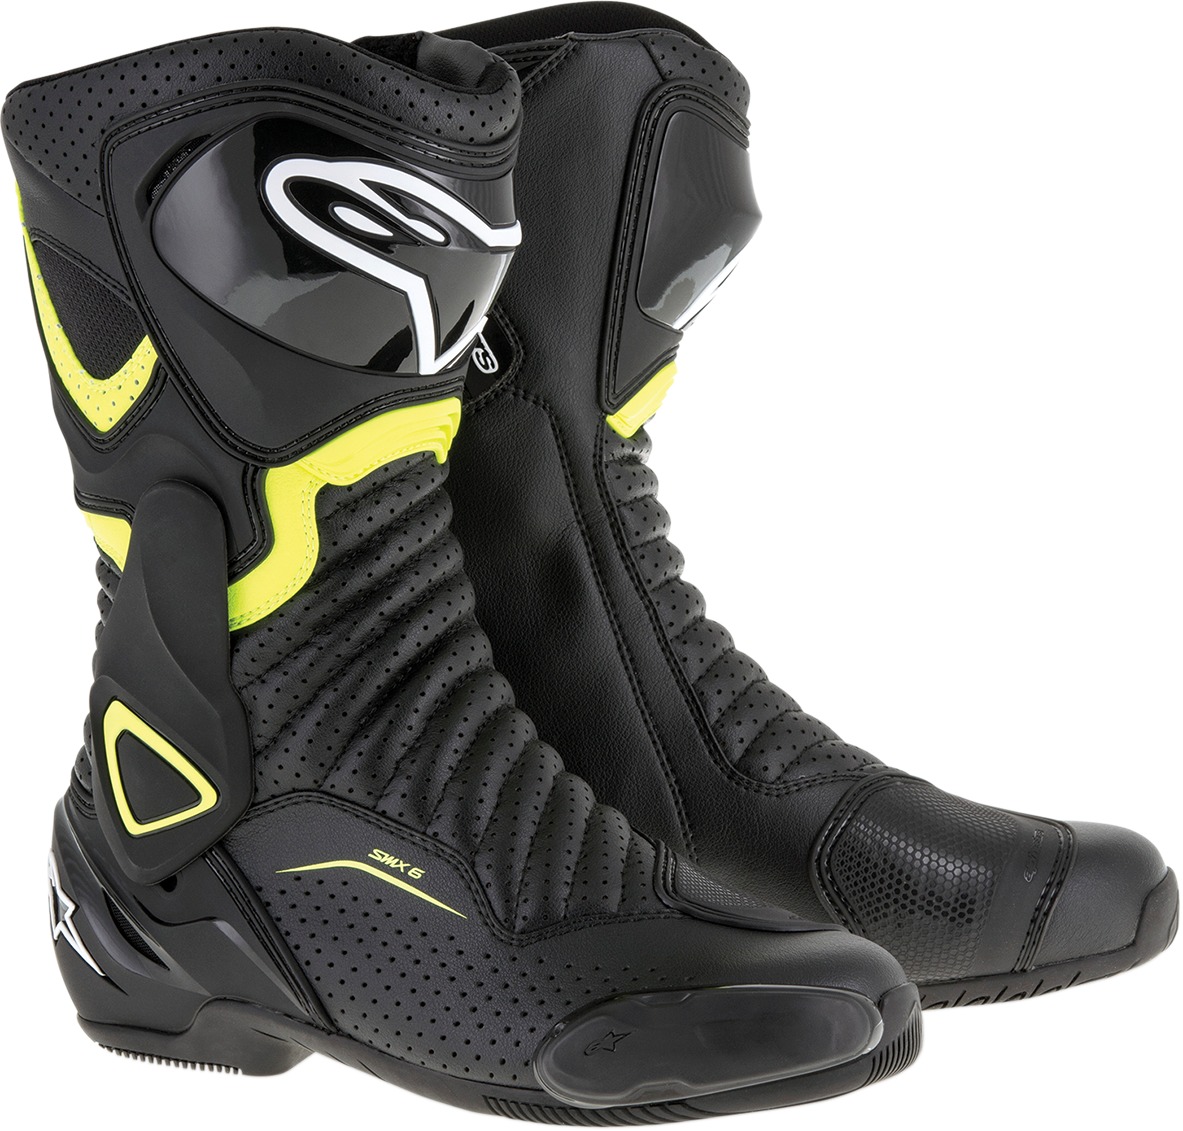 SMX-6v2 Vented Street Riding Boots Black/Yellow US 11.5 - Click Image to Close